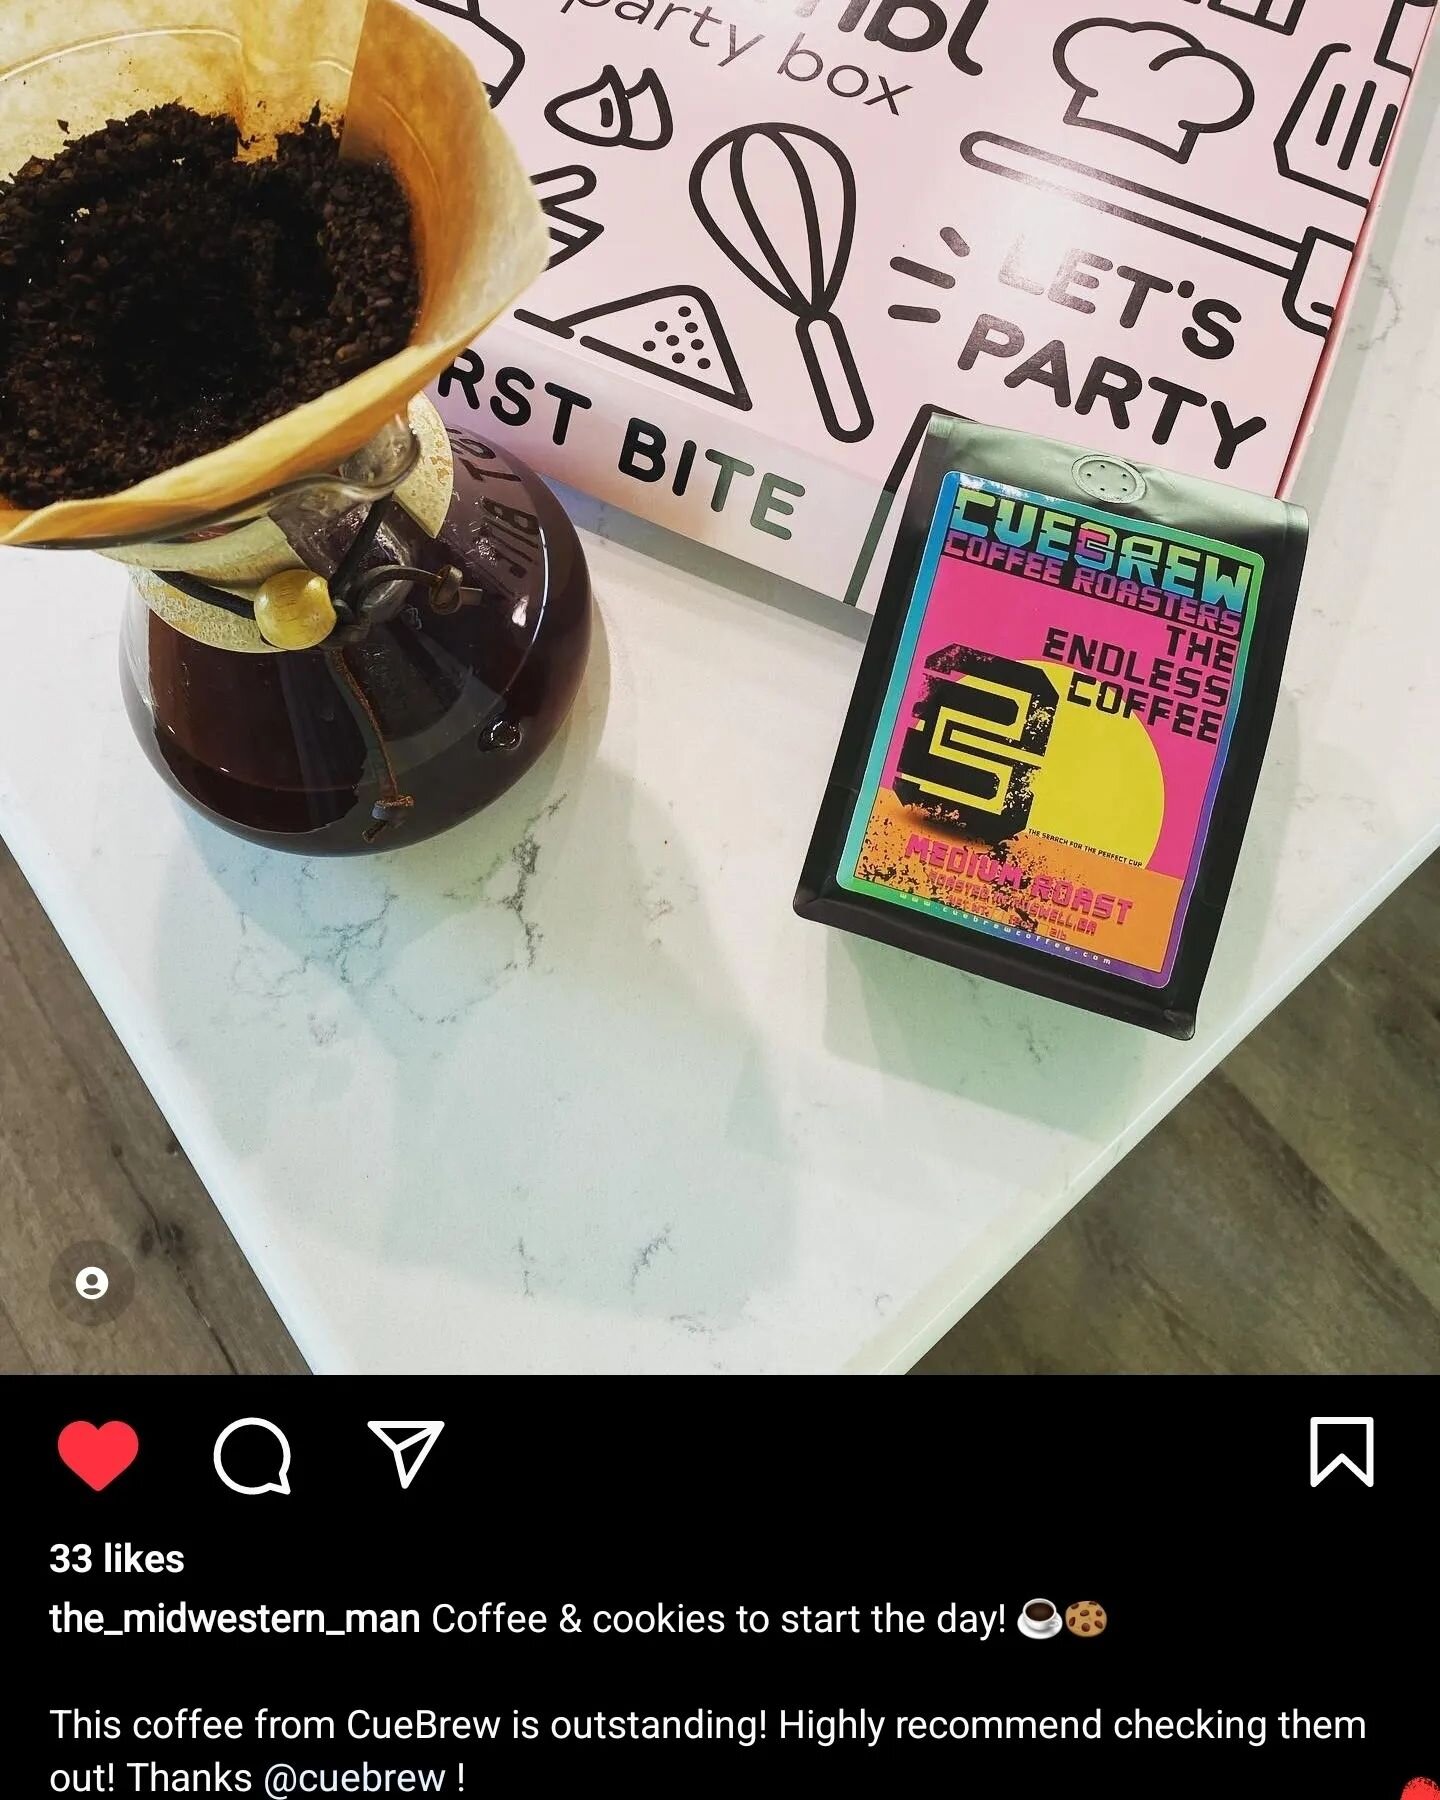 Love see your photos and reviews of our coffee! Thank you all for sharing! Keep them coming! 

#coffee #cuebrew #coffeeroaster #coffeetime #smallbatchcoffee #shopsmall #smallbusiness #roswellga #summercoffee #icedcoffee #coldbrew #roaster